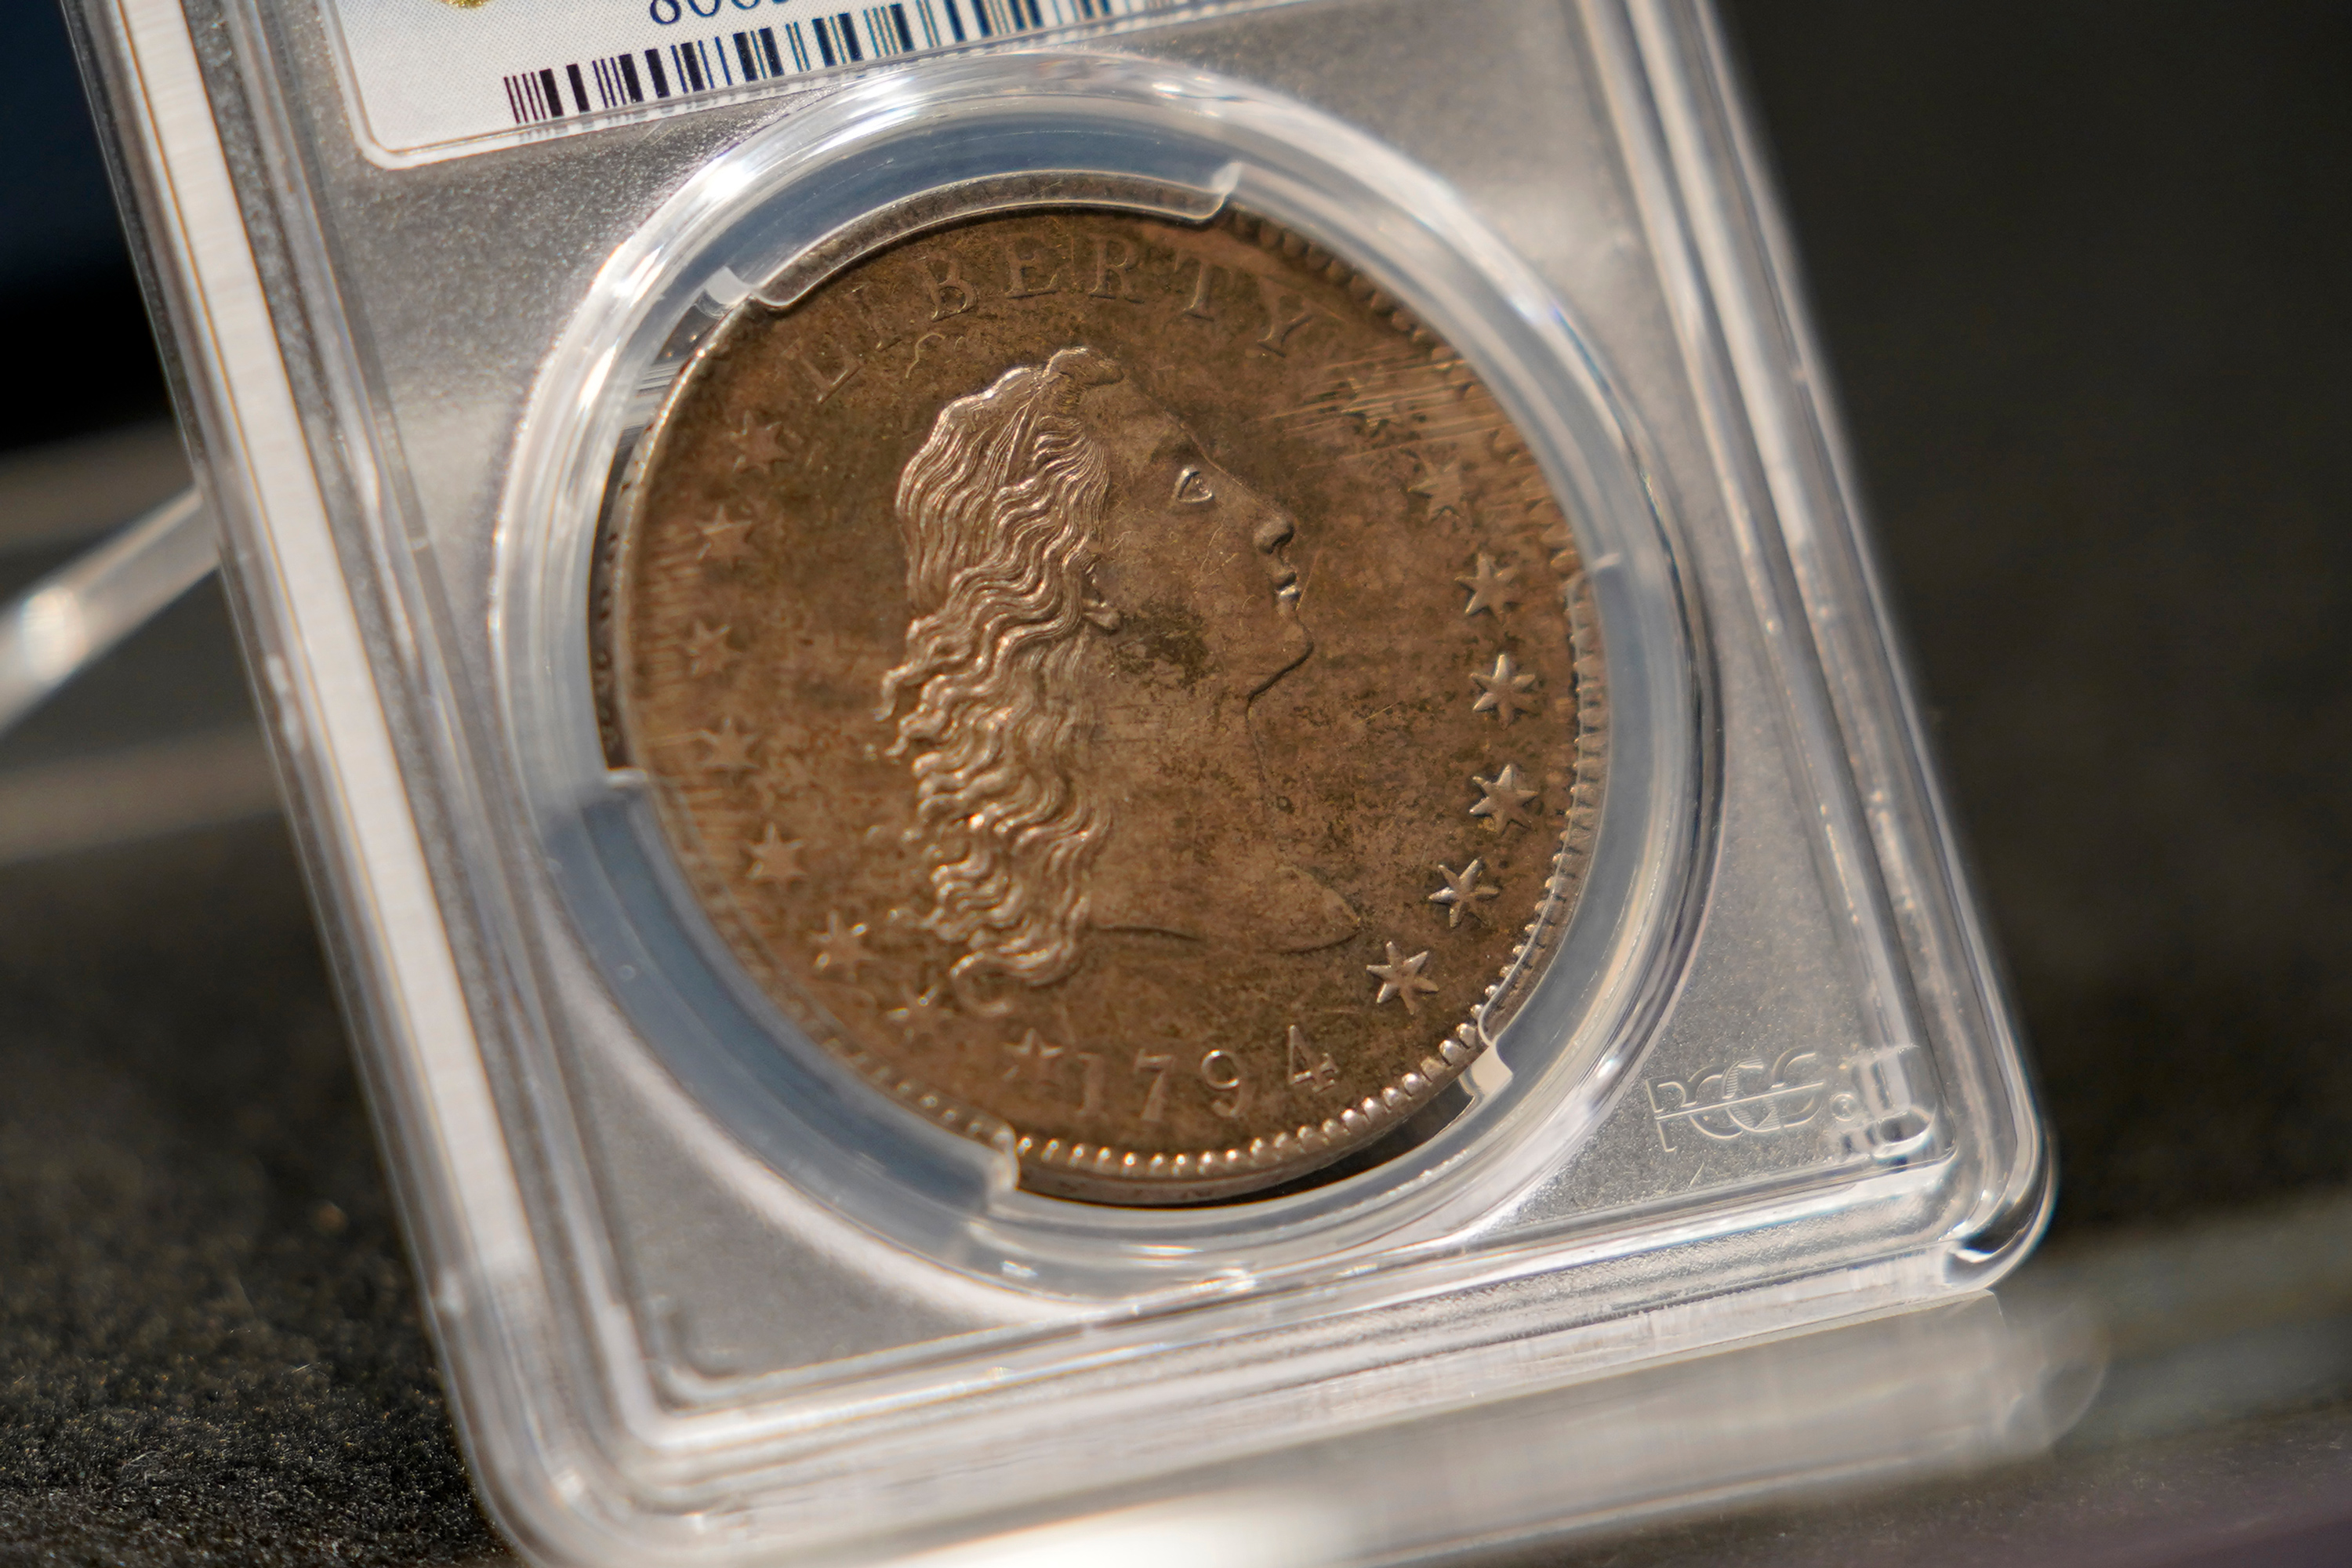 A 1794 silver dollar sold for $10 million in 2013. Now the 